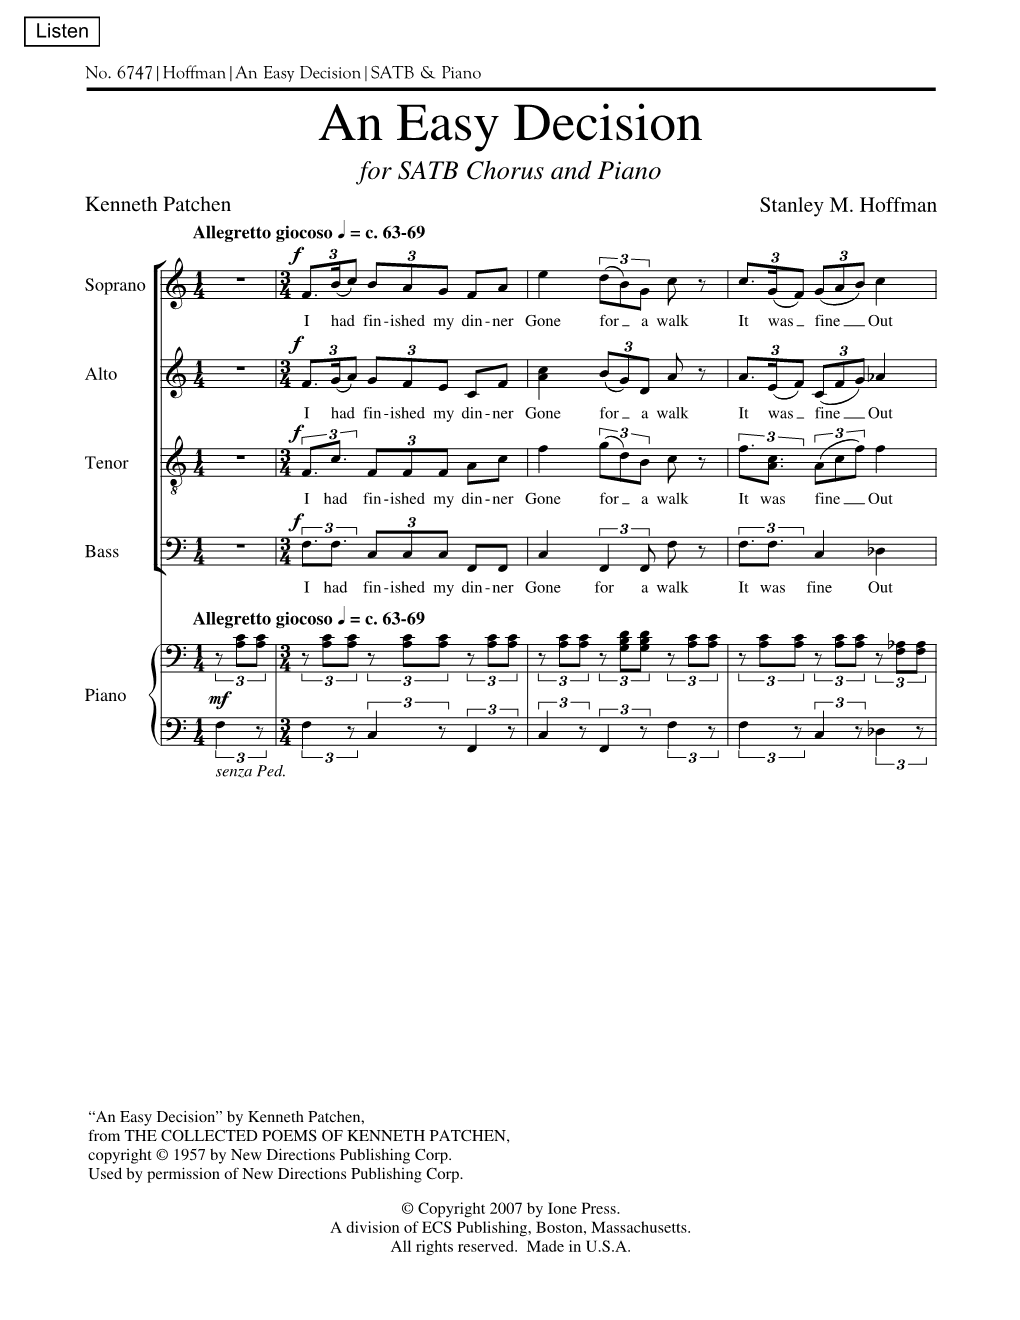 An Easy Decision|SATB & Piano an Easy Decision for SATB Chorus and Piano Kenneth Patchen Stanley M